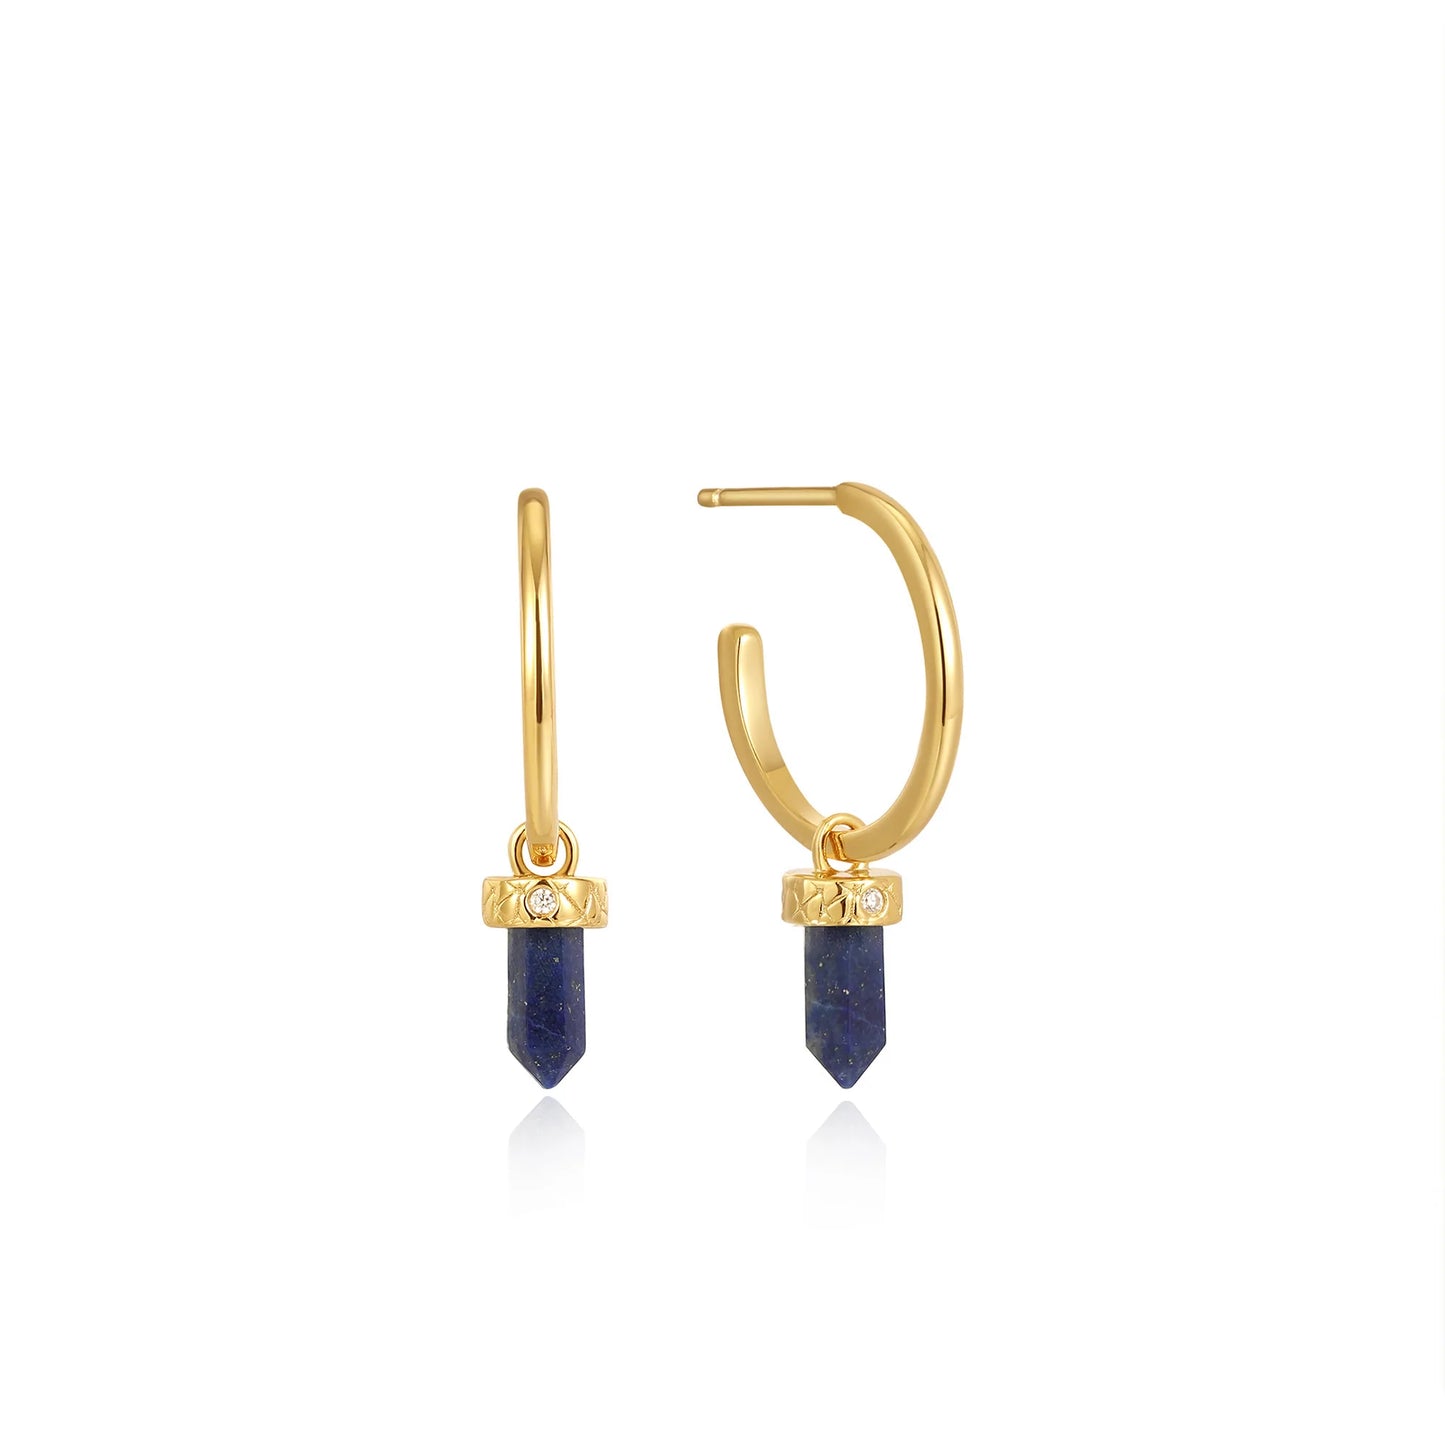 GOLD LAPIS POINT PENDANT SMALL HOOP EARRING